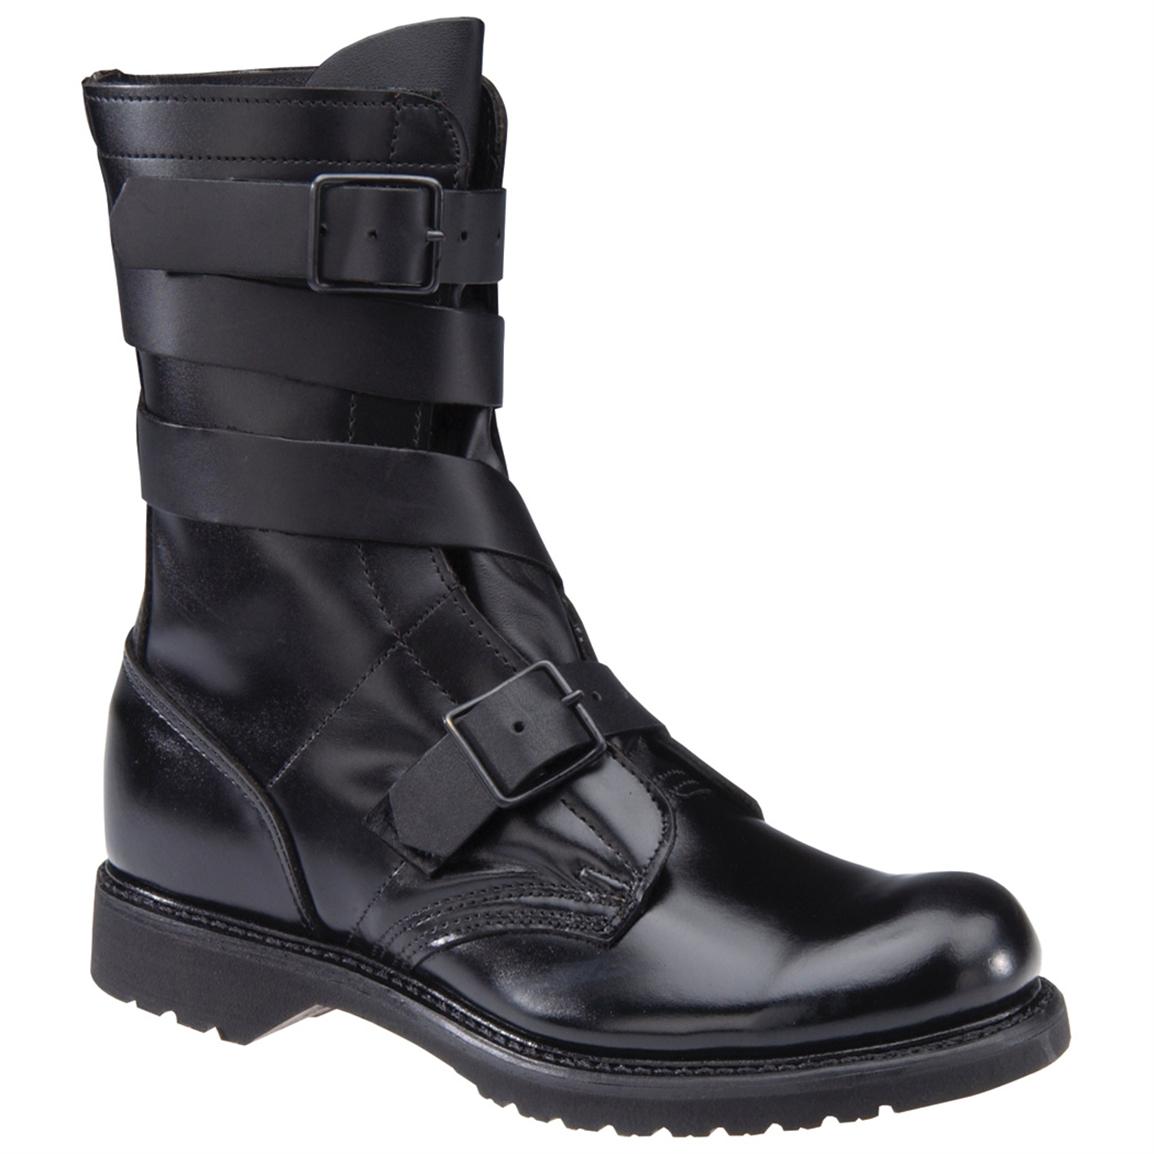 Tanker Boots Army - Army Military